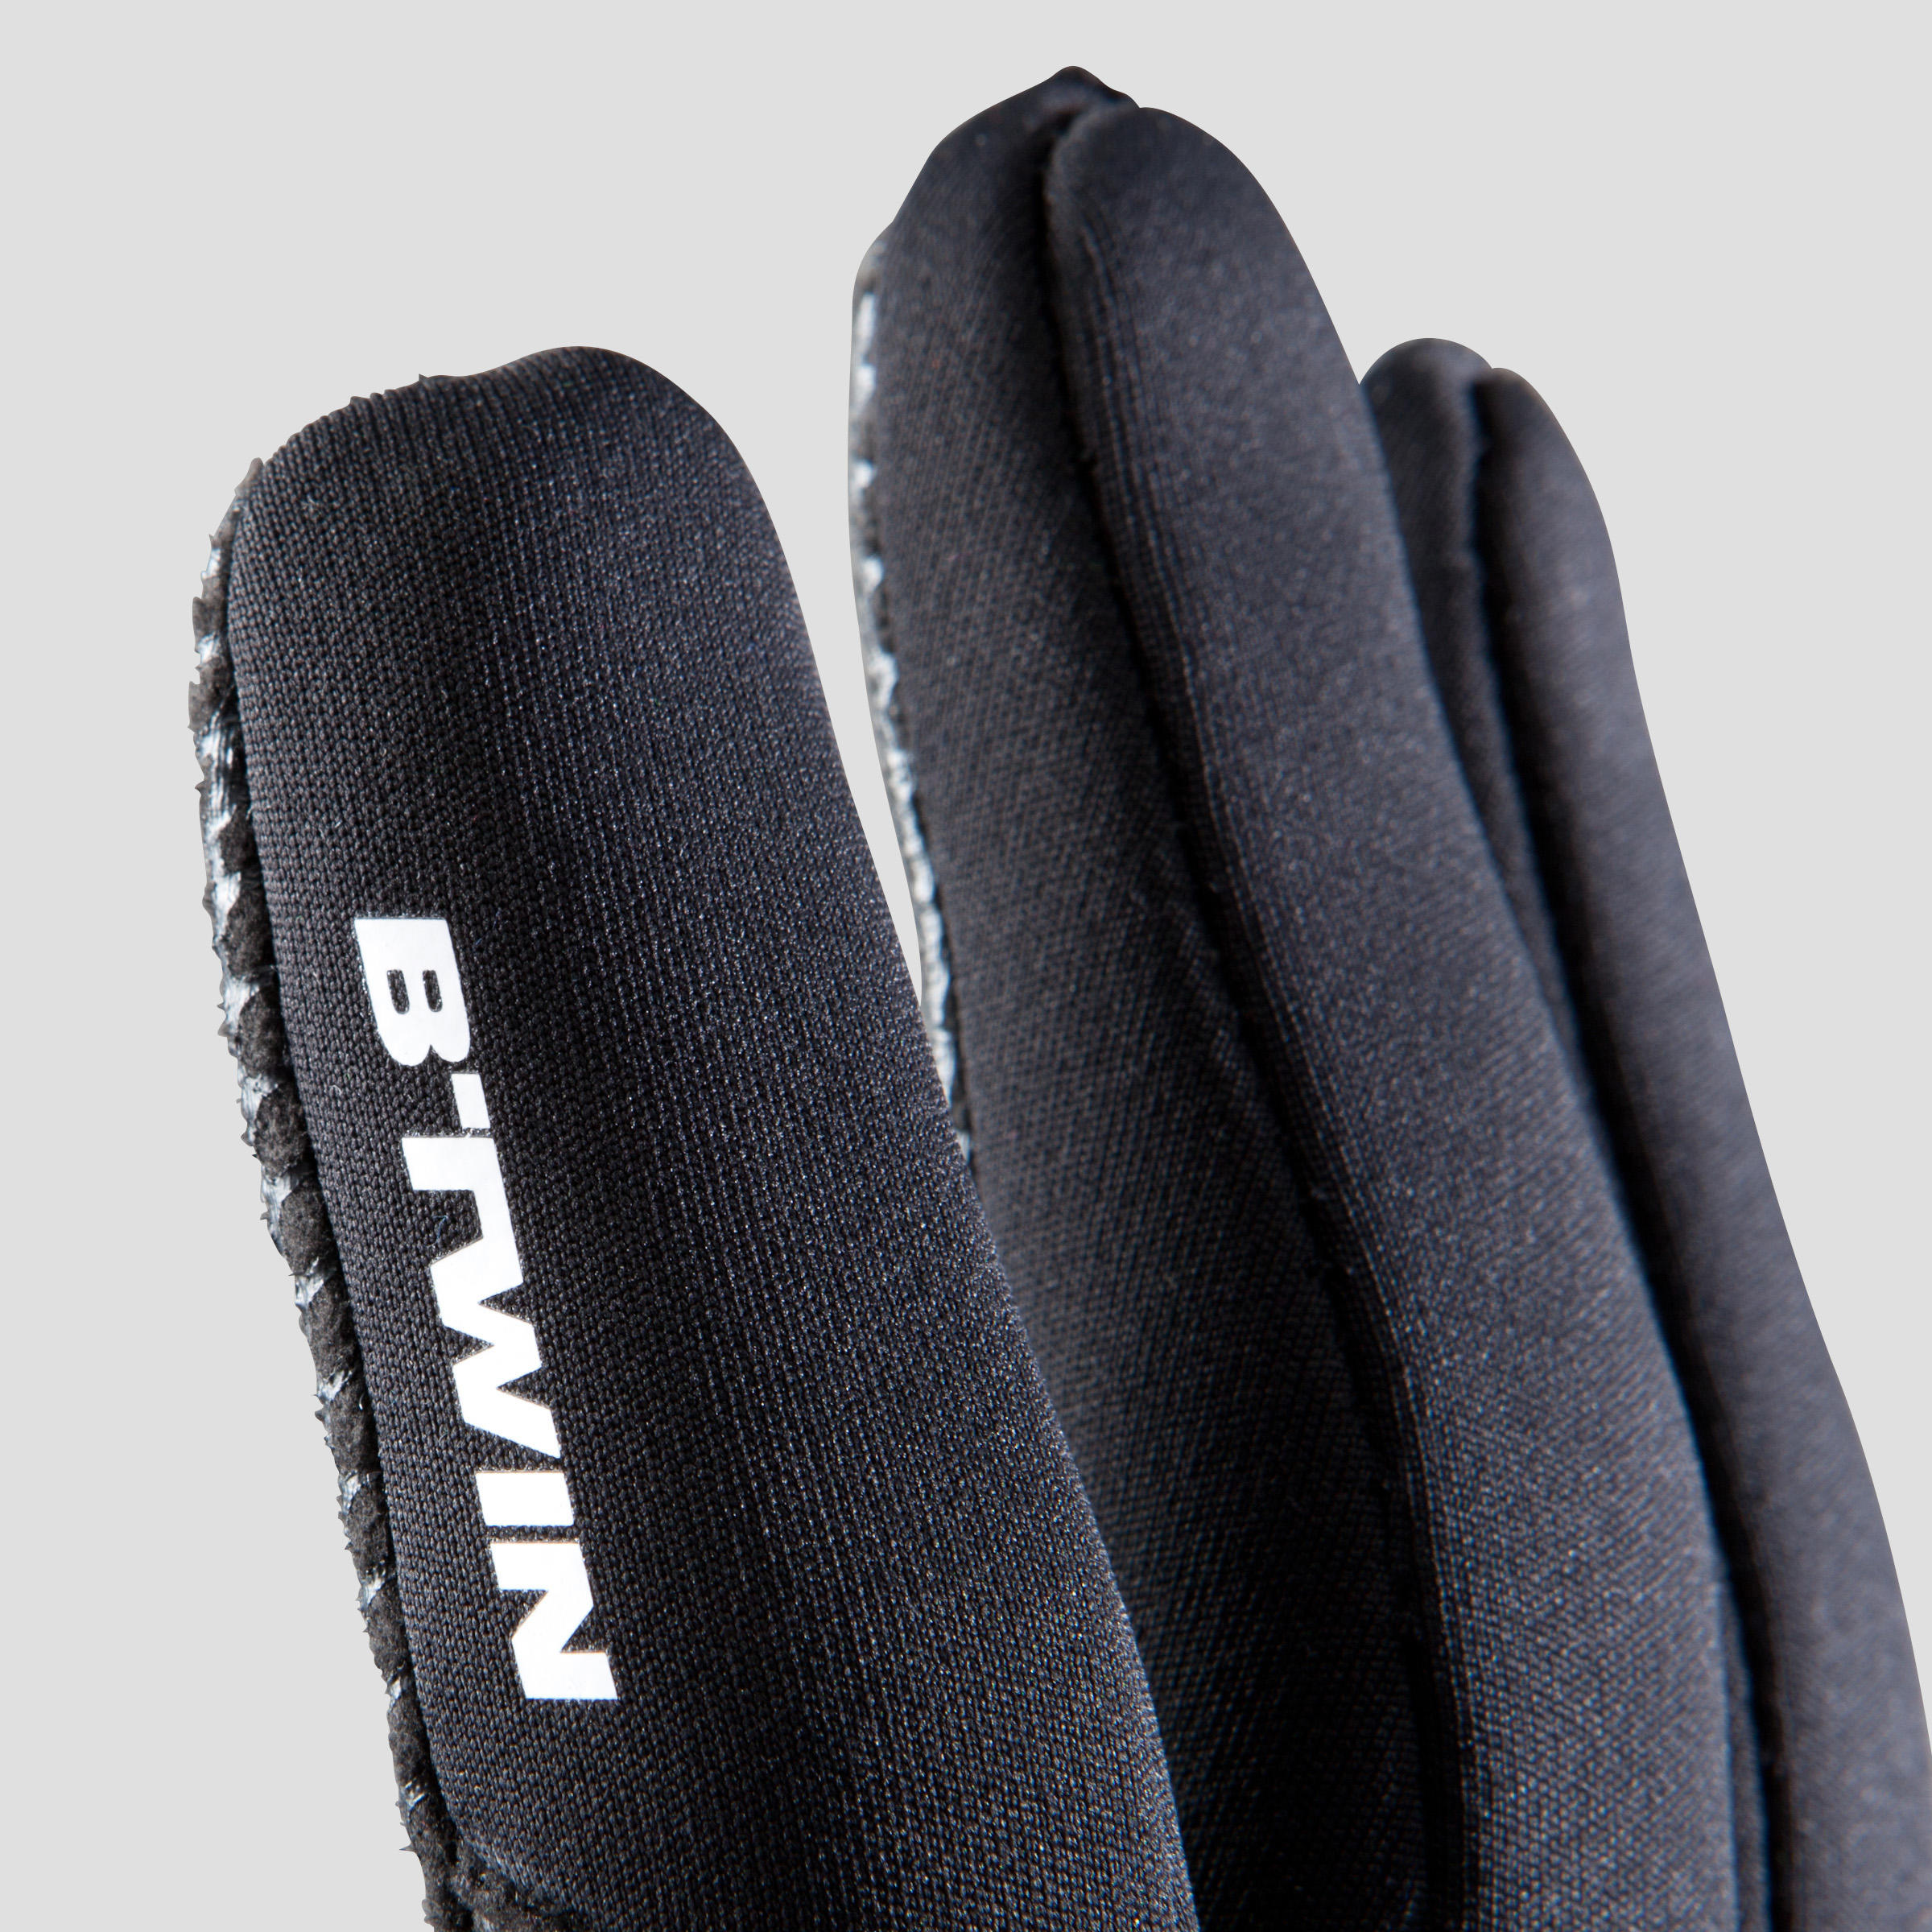 500 Cycling Gloves for Spring/Autumn - Black 7/9